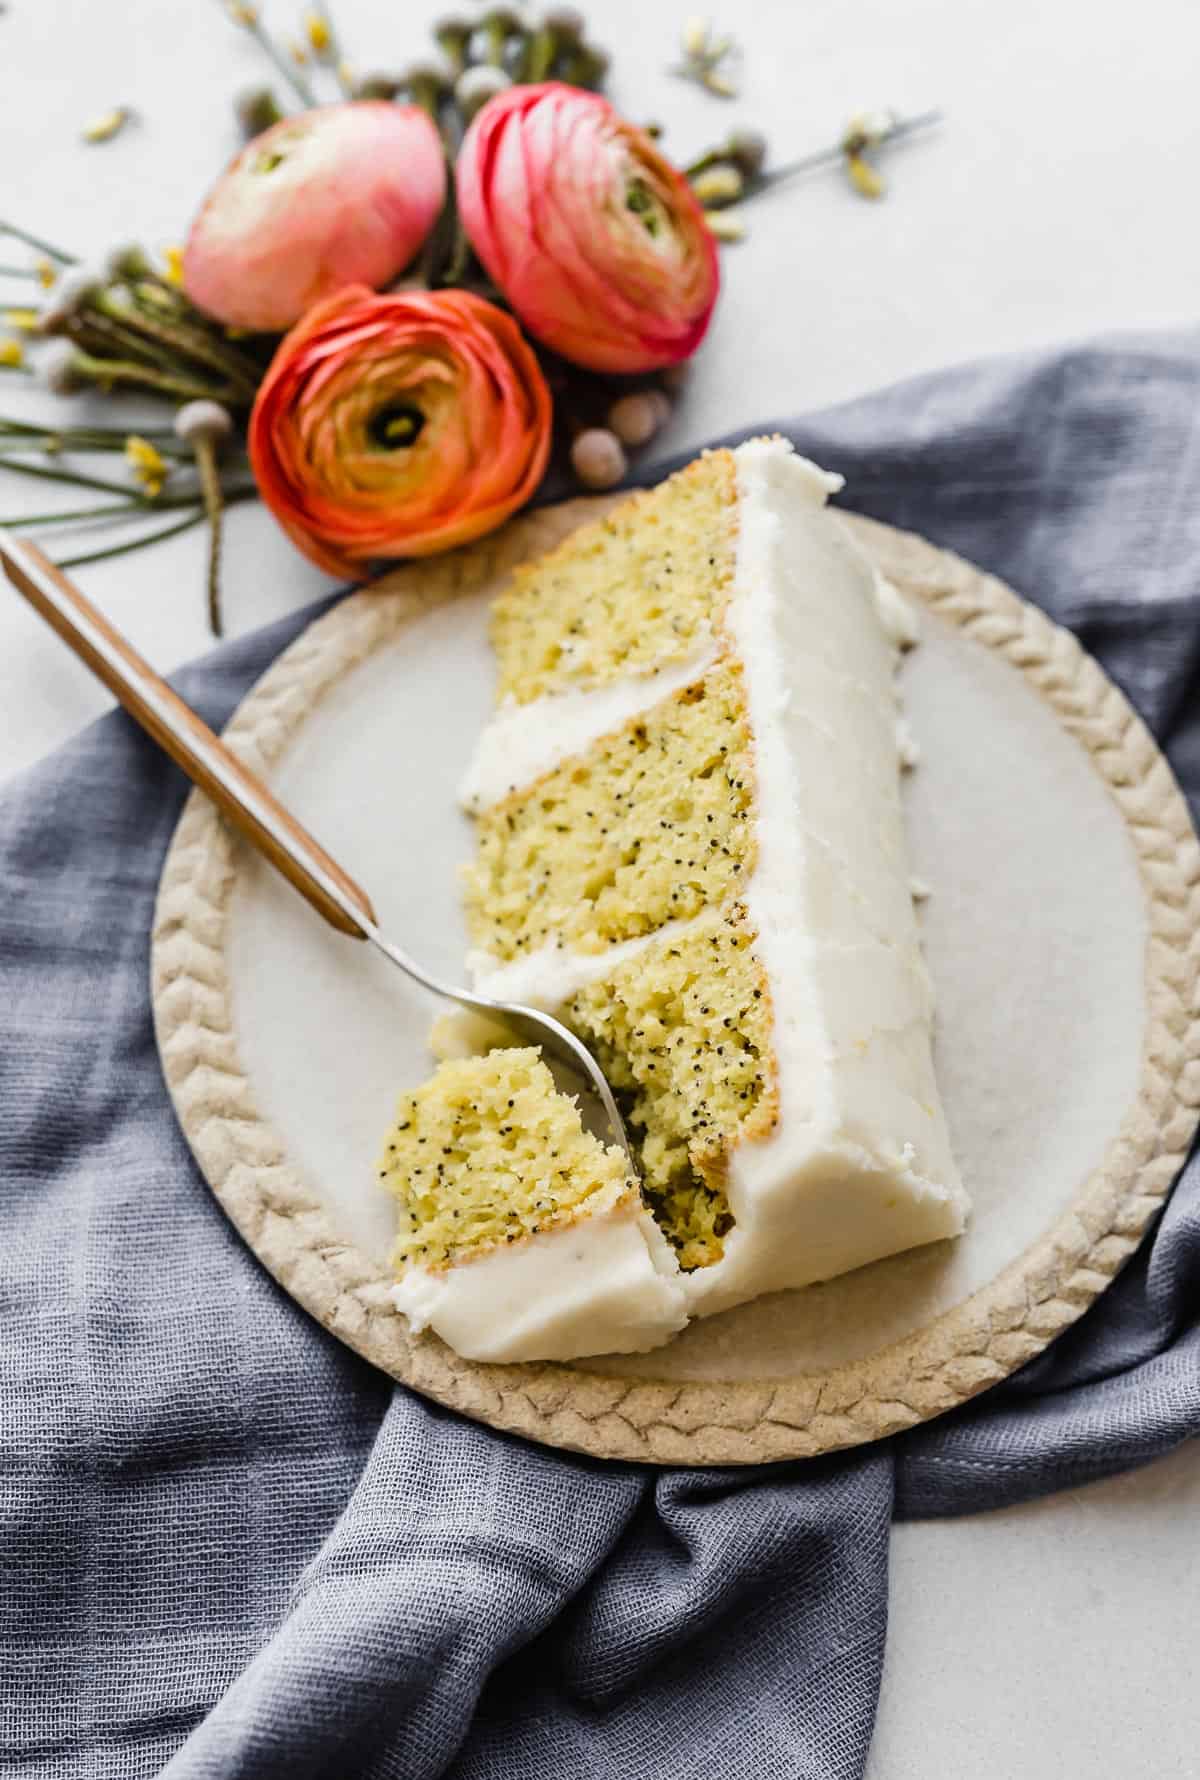 A fork cutting into a slice of lemon poppy seed layer cake on a tan plate.